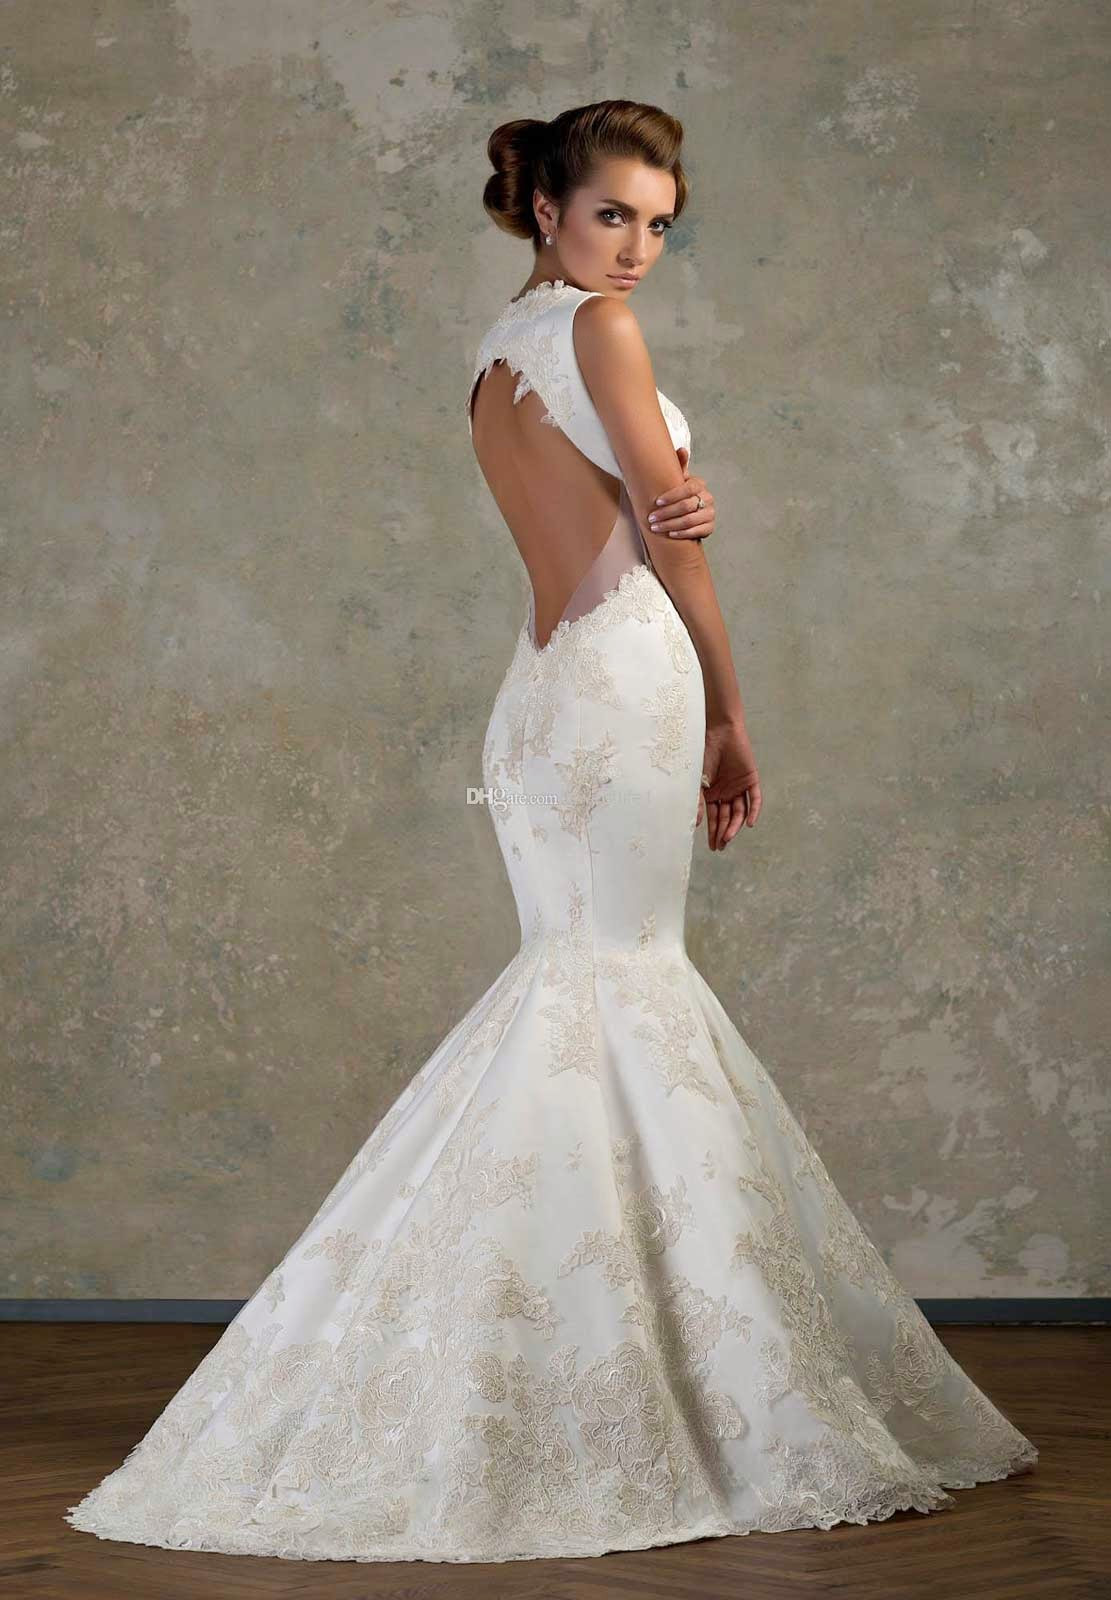 Sexy Lace Wedding Dresses
 Backless Lace y Mermaid Wedding Dresses Ideas